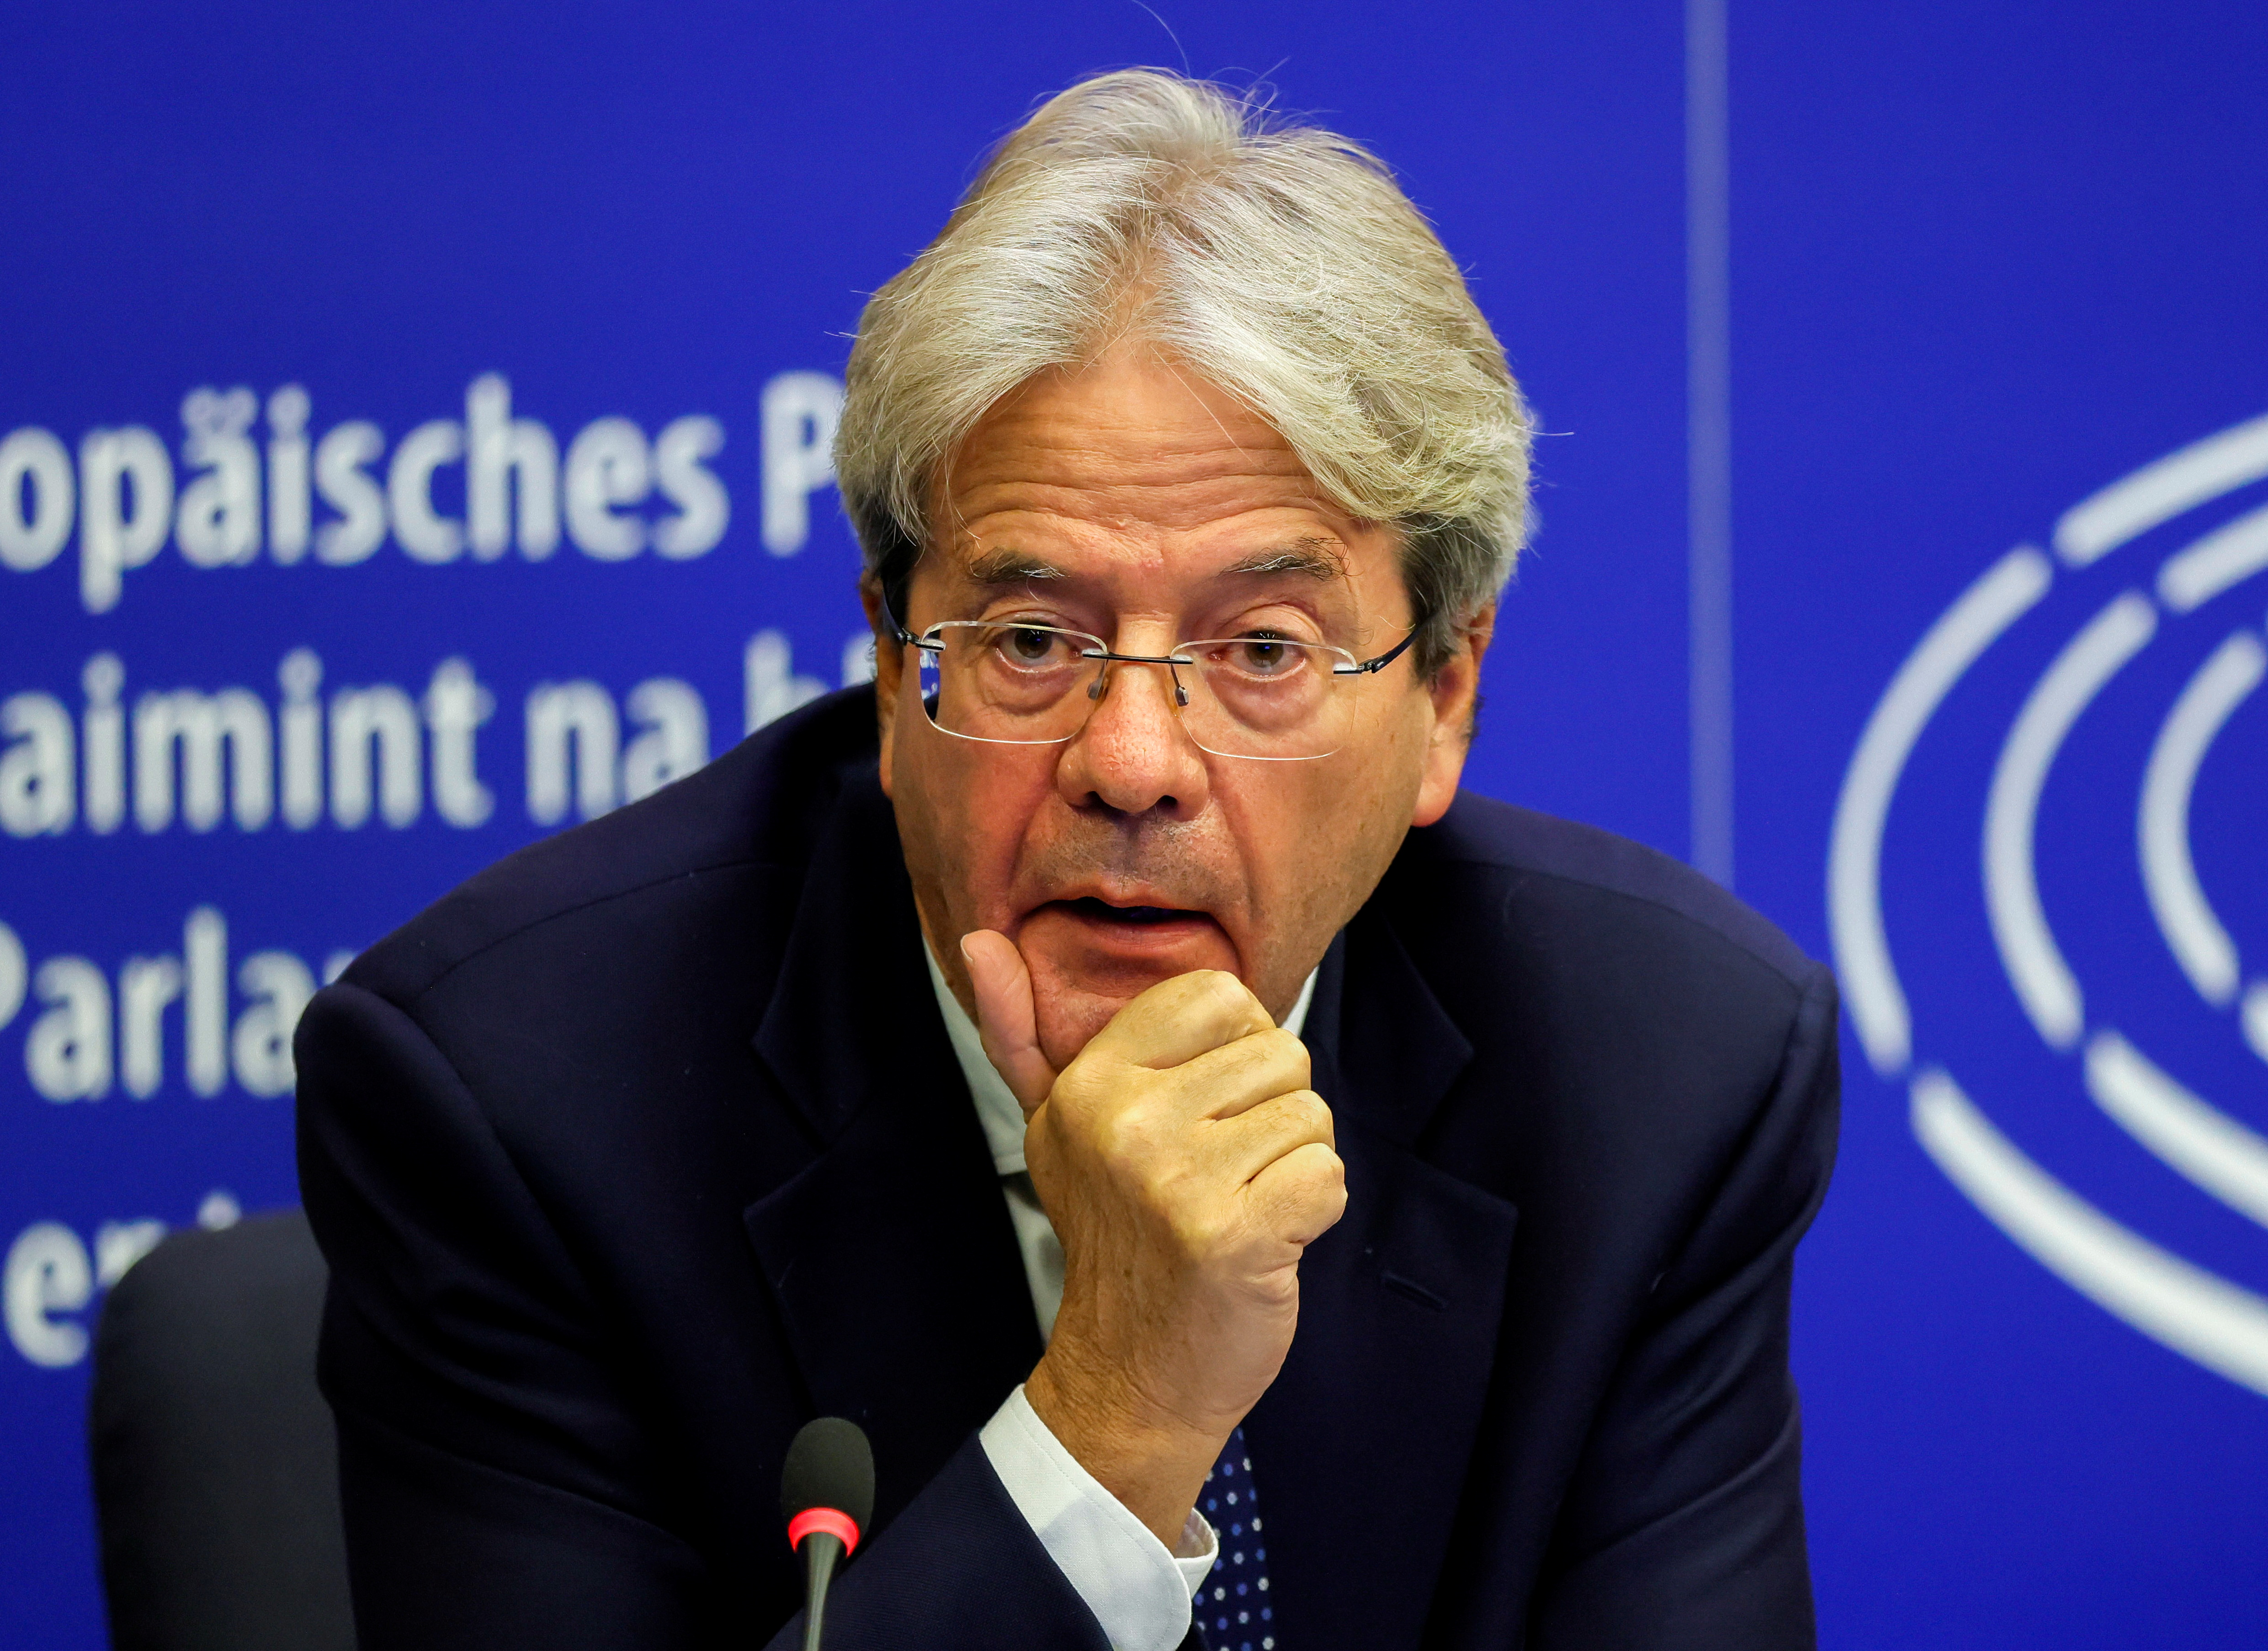 European Commissioner for Economy Paolo Gentiloni attend a press conference at European Parliament session in Strasbourg